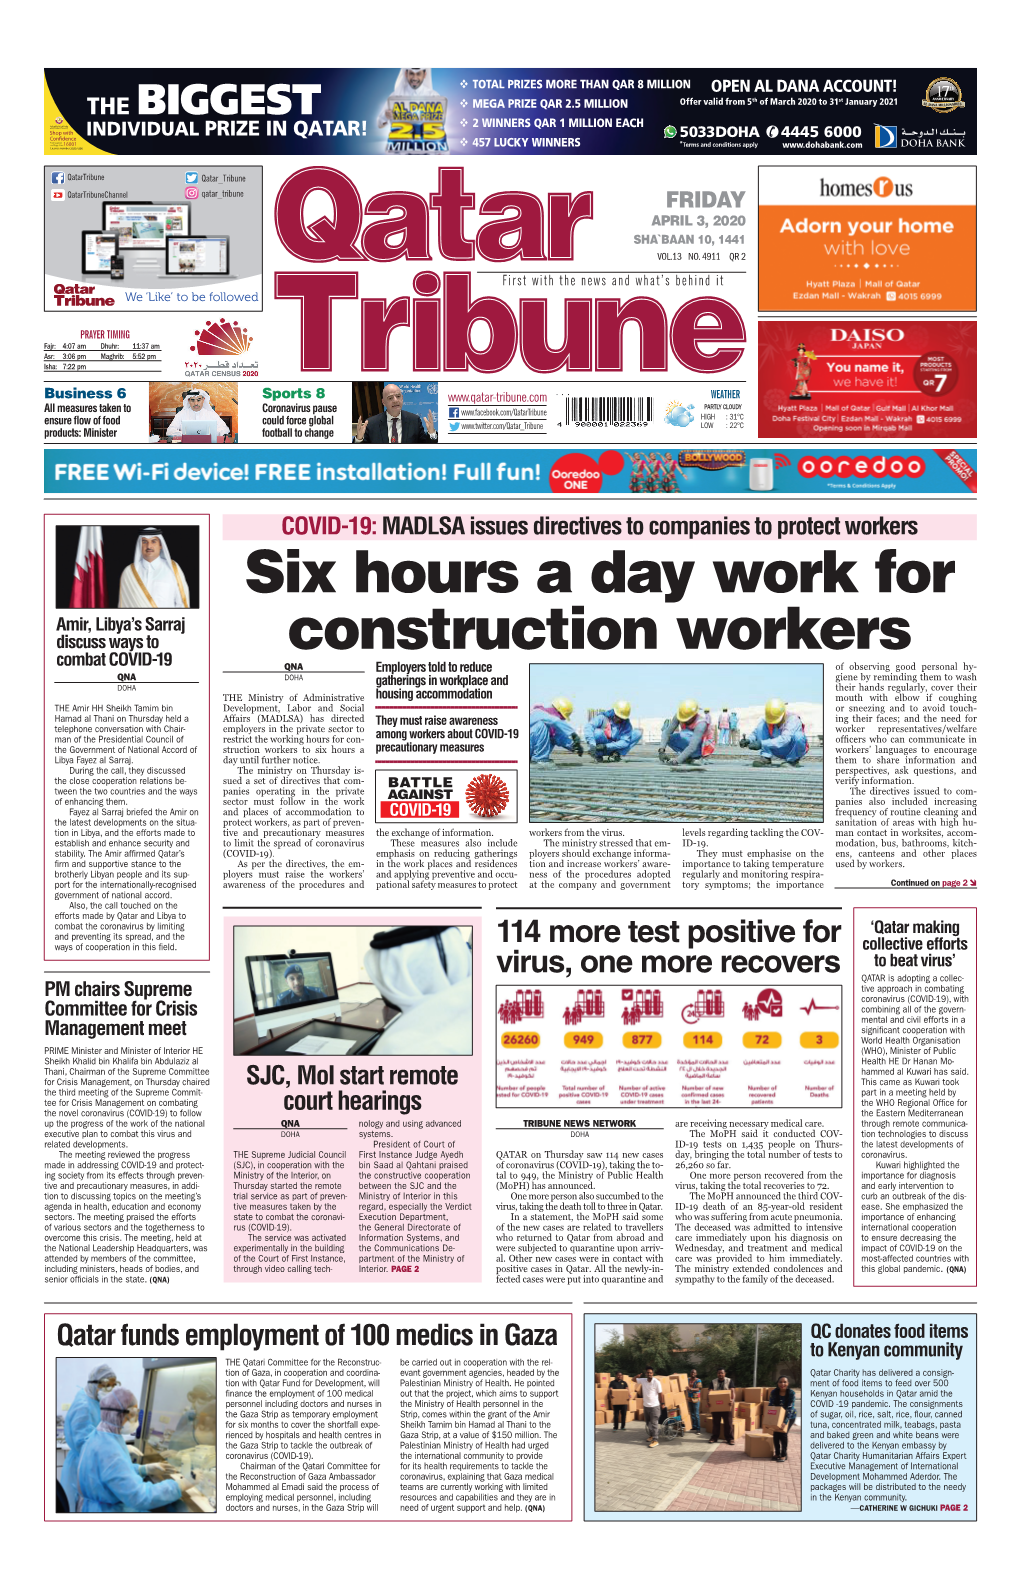 Six Hours a Day Work for Construction Workers